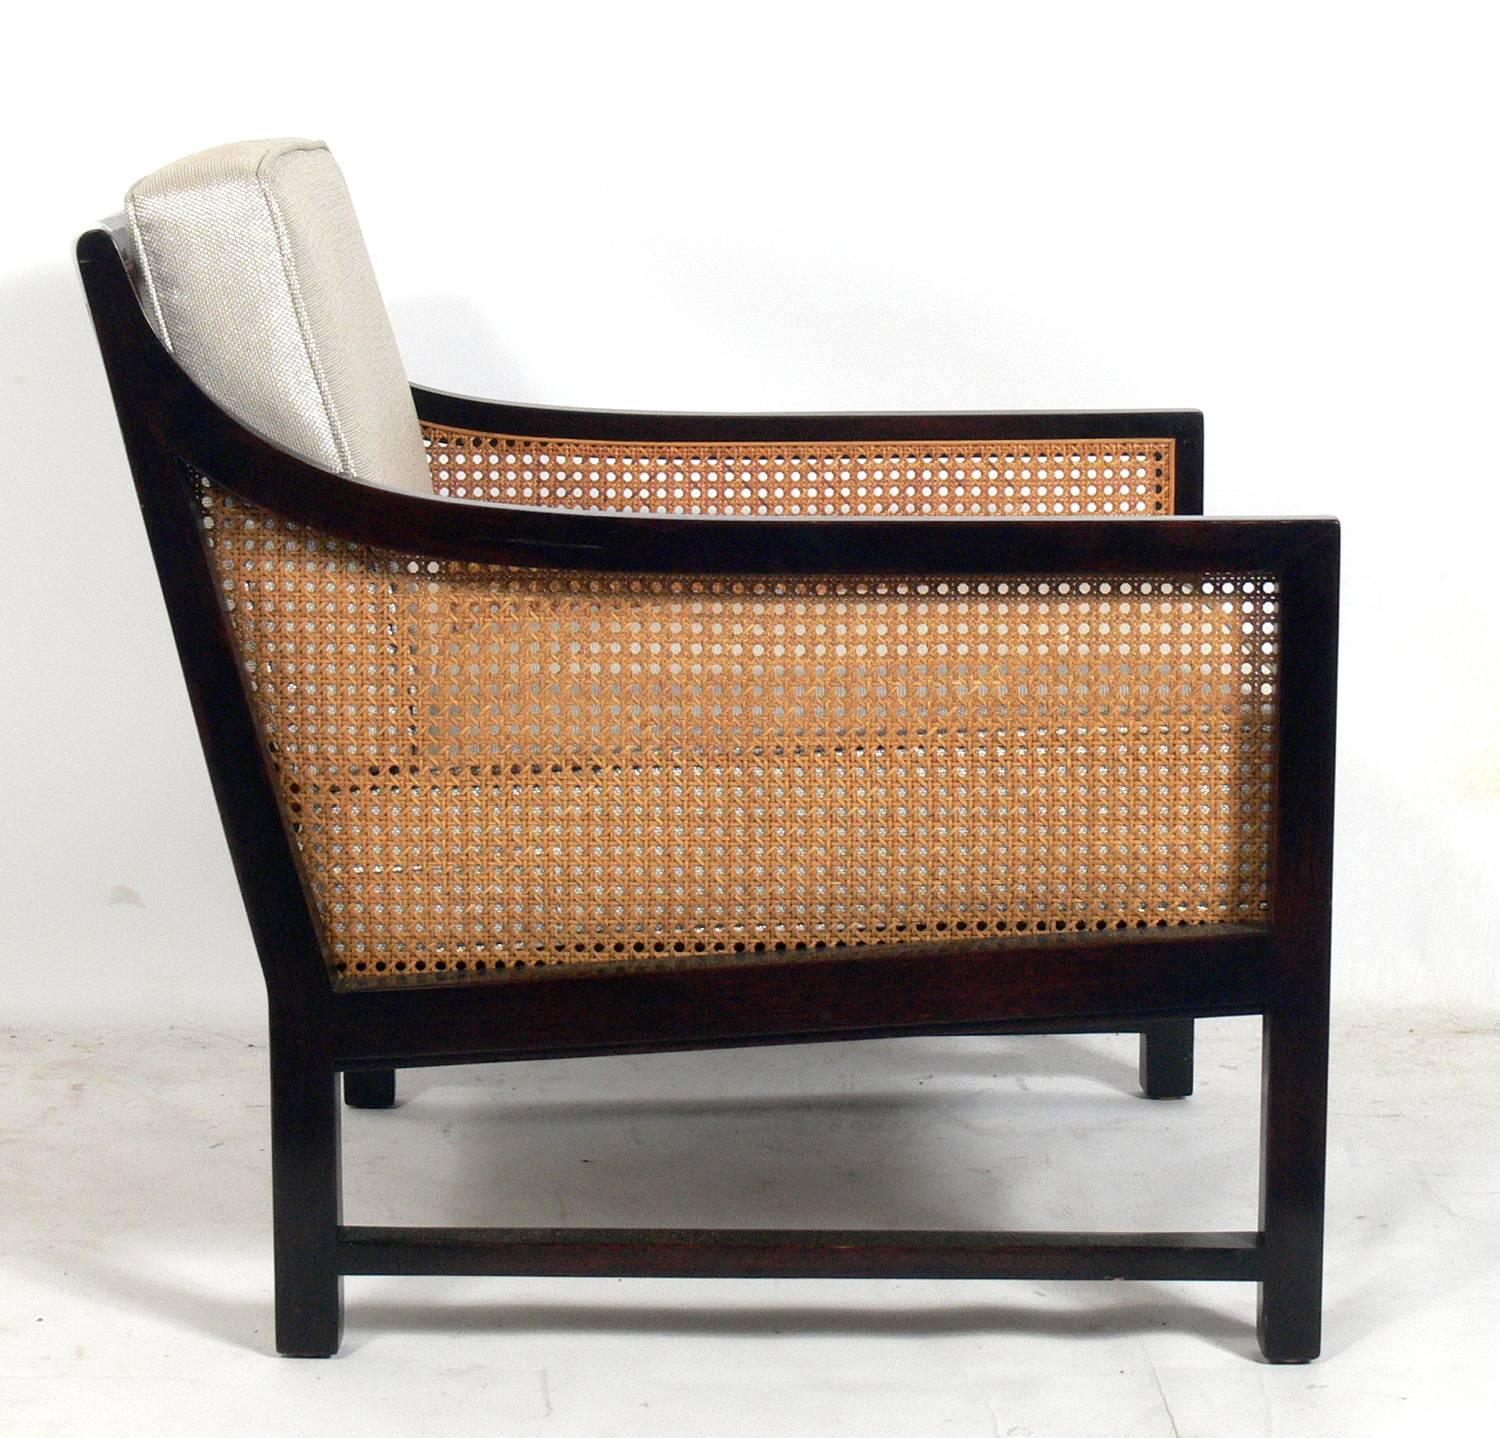 Pair of clean lined caned lounge chairs, American, circa 1980s. They are currently being reupholstered and can be completed in your fabric at no additional charge, simply send us five yards of your fabric after purchase.